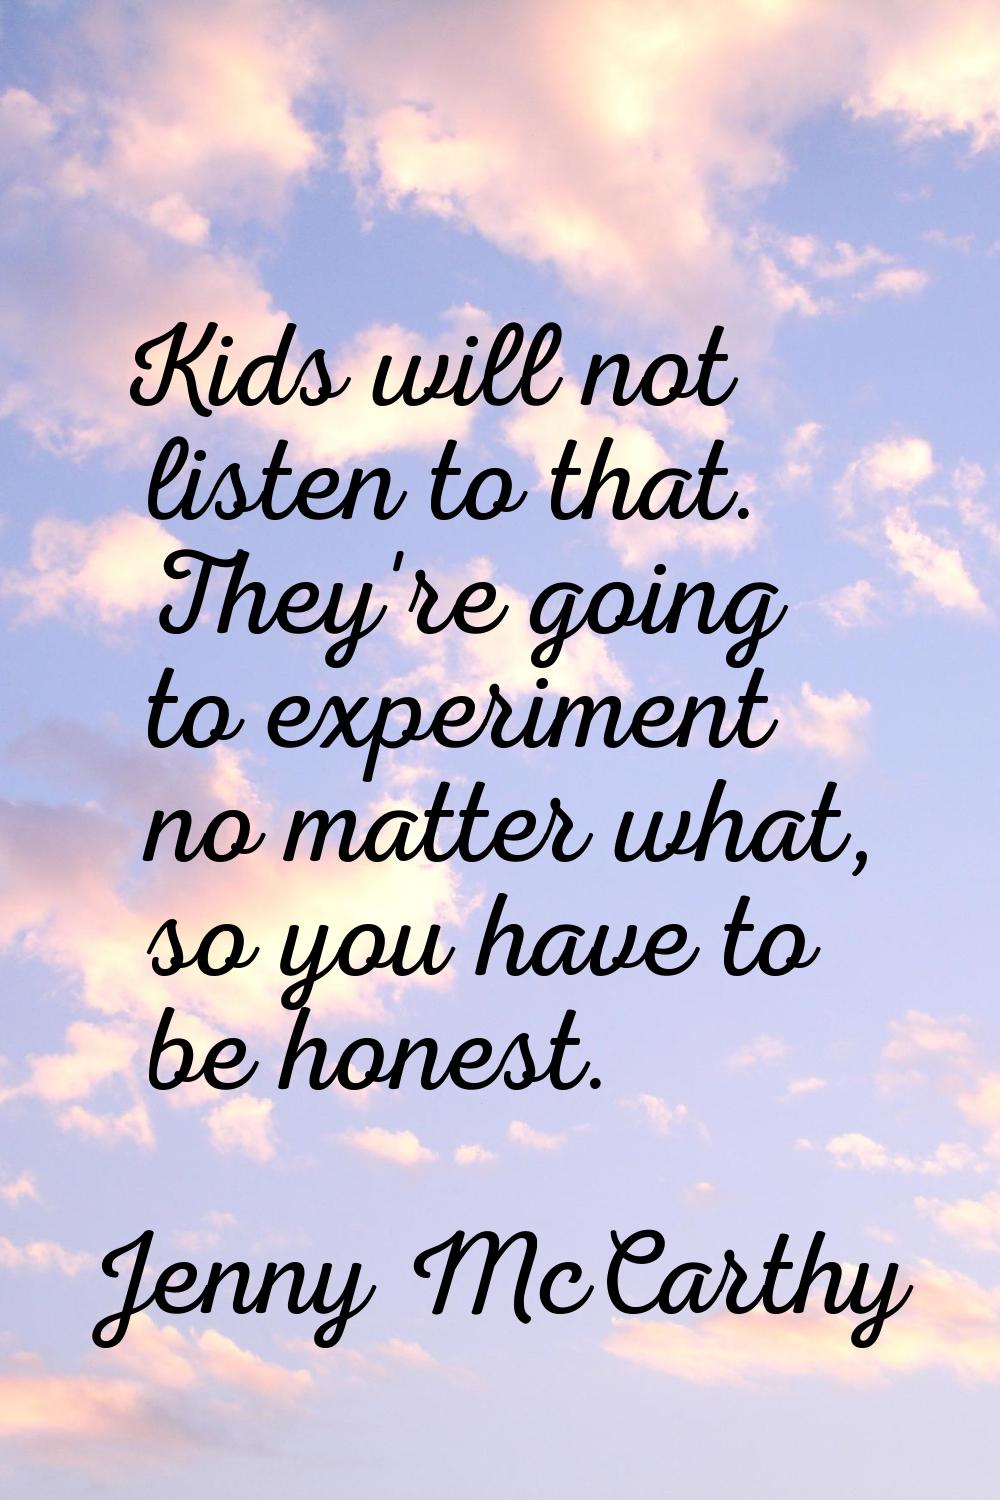 Kids will not listen to that. They're going to experiment no matter what, so you have to be honest.